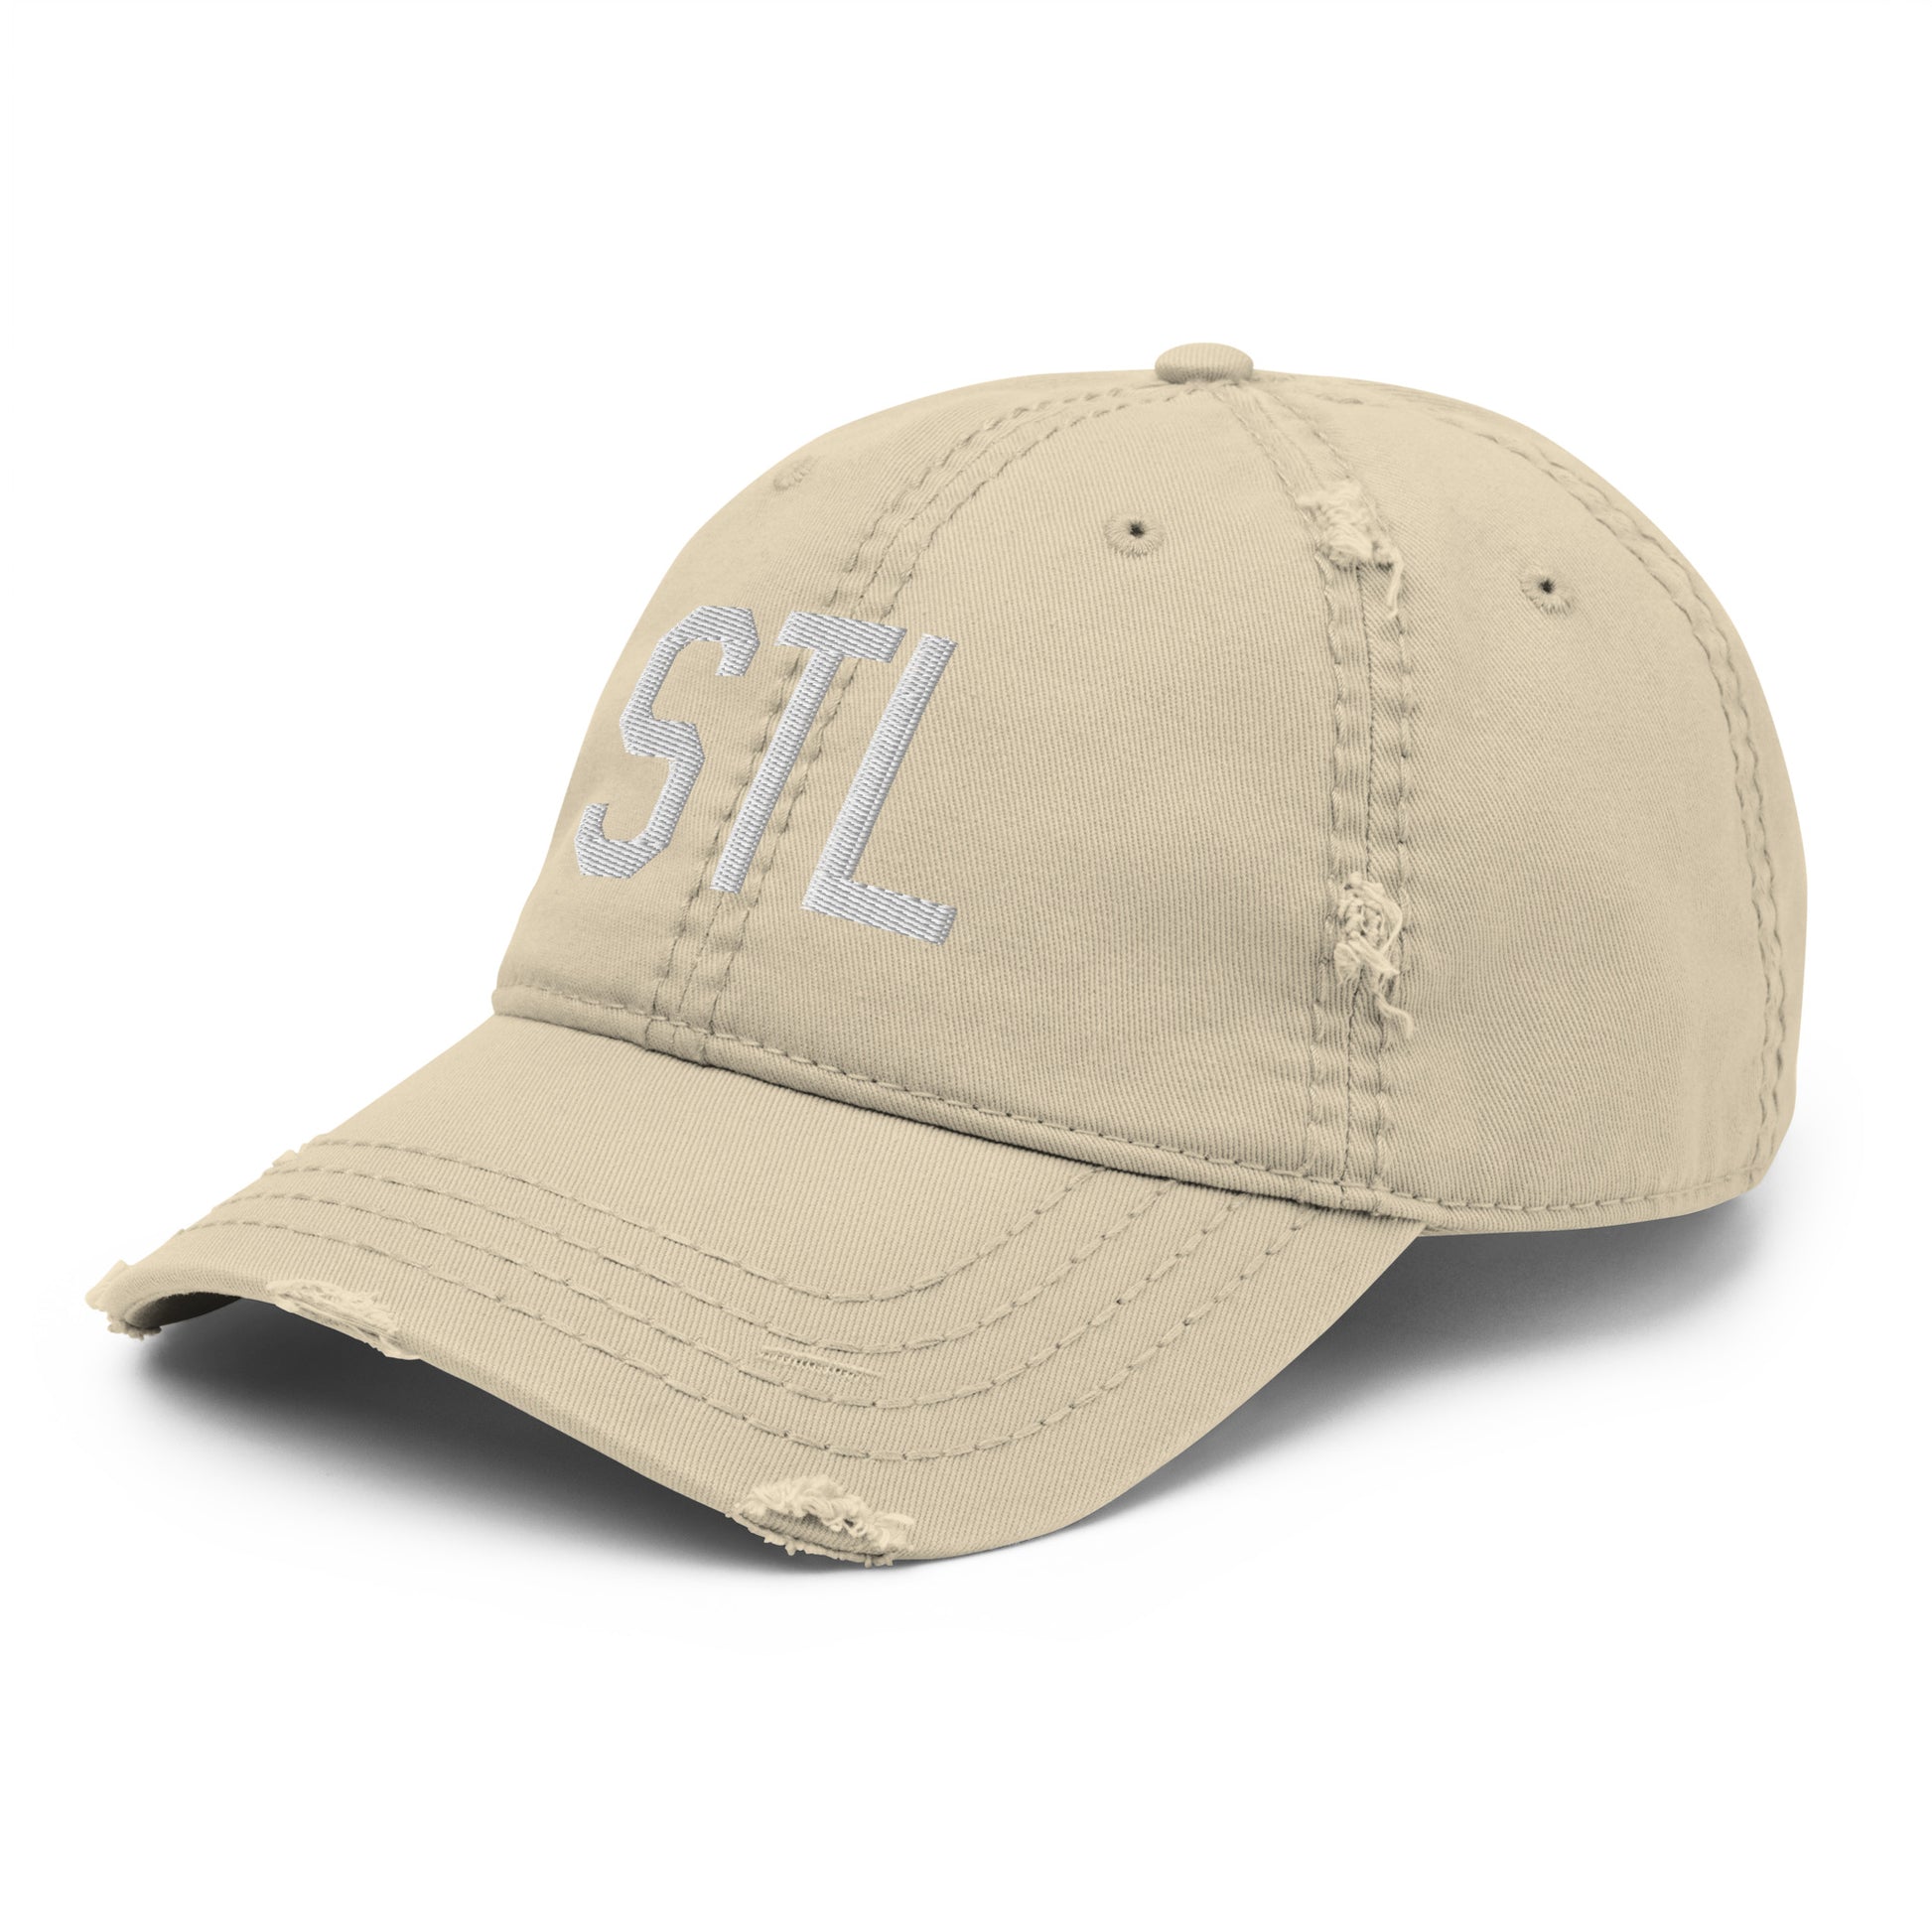 Airport Code Distressed Hat - White • STL St. Louis • YHM Designs - Image 19